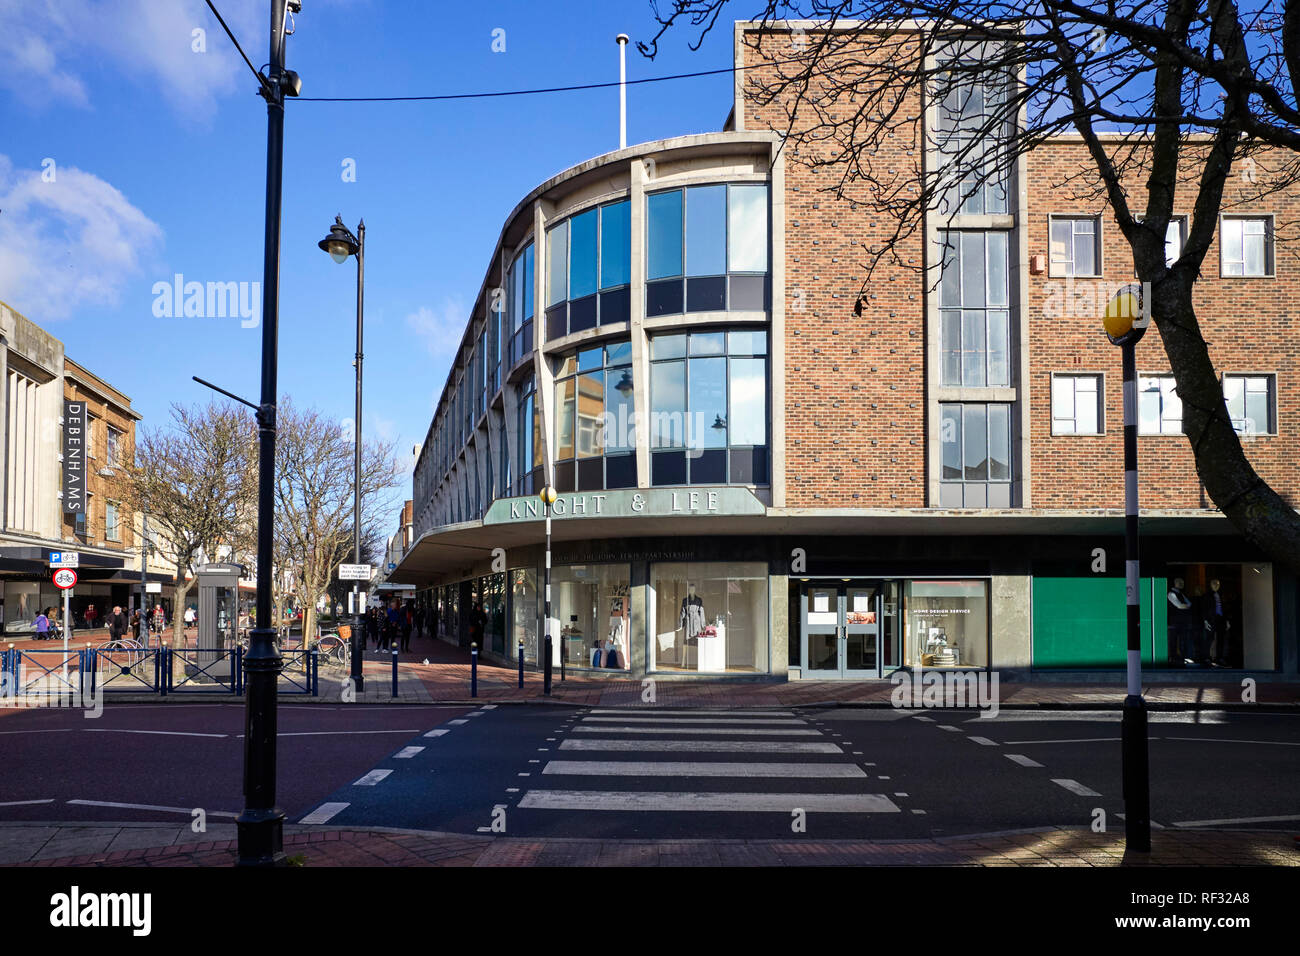 Southsea, Portsmouth, UK. 23rd January, 2019. Exterior of the John Lewis department store in Southsea, Portsmouth that today announced it will be closing. The store has traded as Knight & Lee since 1865 and was acquired by the John Lewis Partnership in 1933 Credit: Ian Pilbeam/Alamy Live News Stock Photo